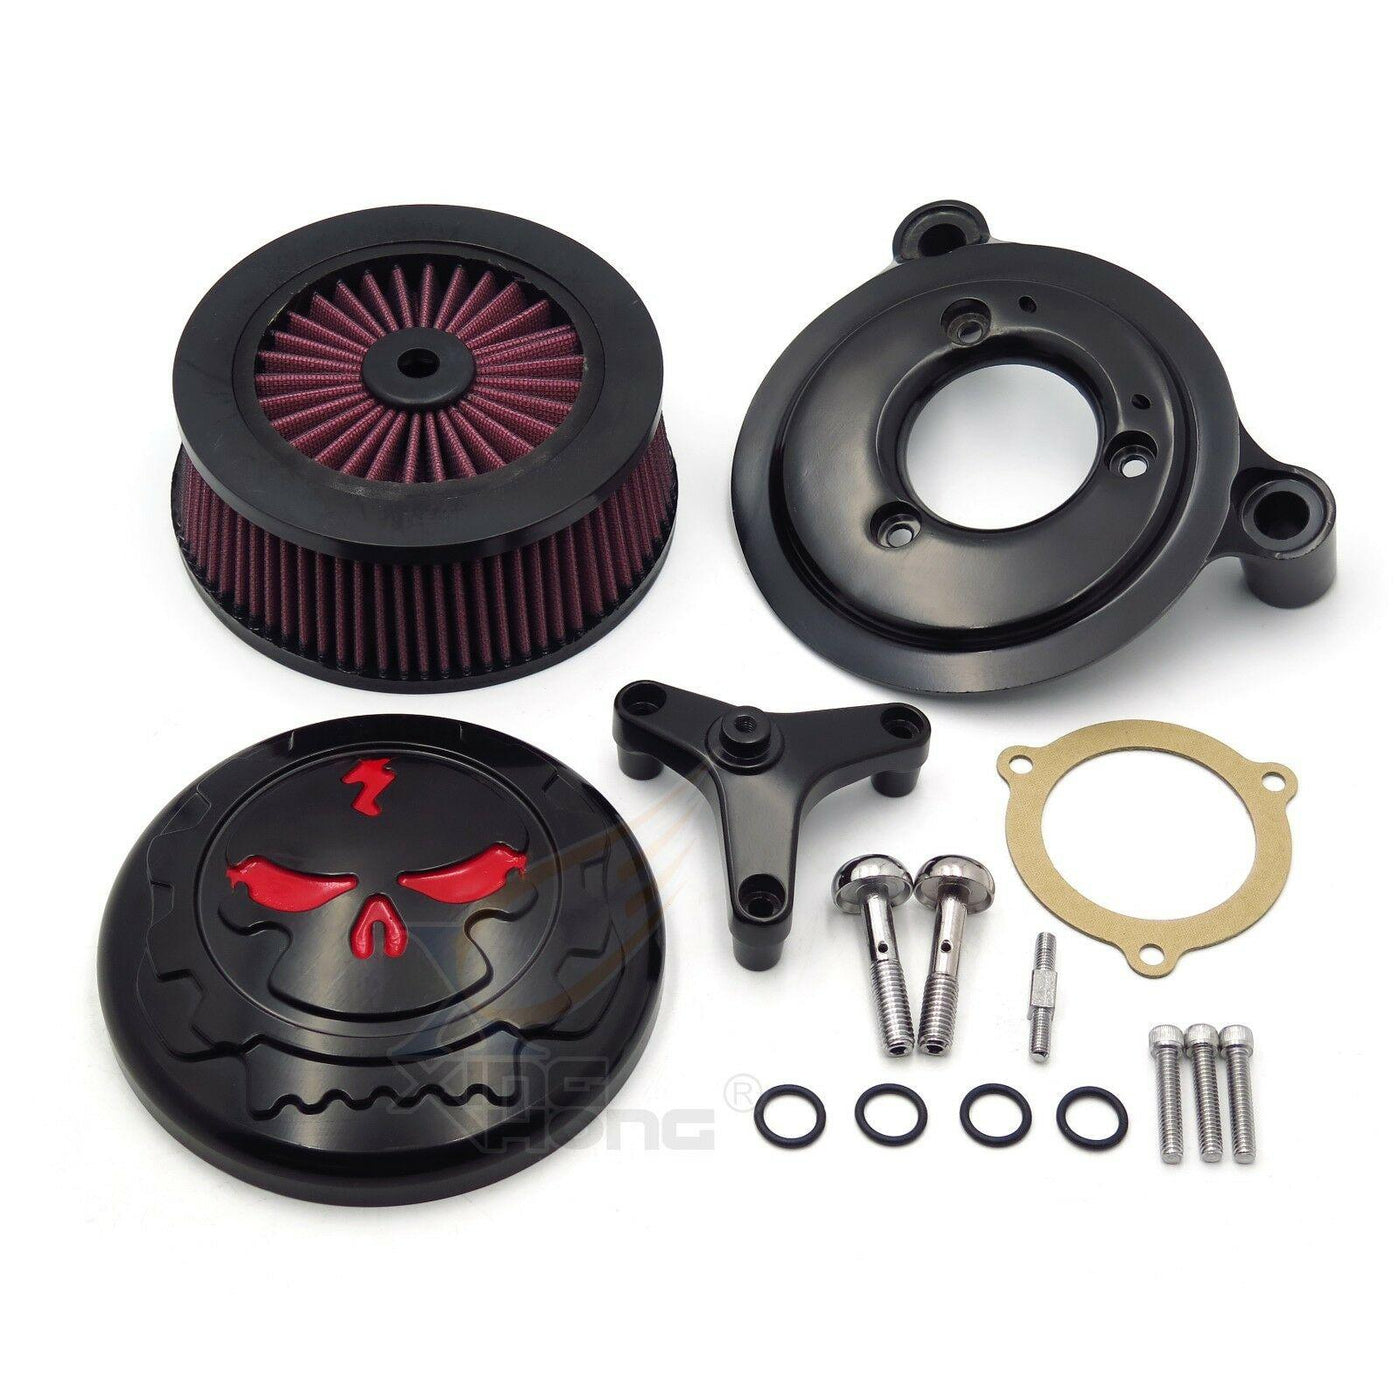 Motorcycle Black Air Cleaner Intake Filter System Kit For Harley Touring 08-UP - Moto Life Products